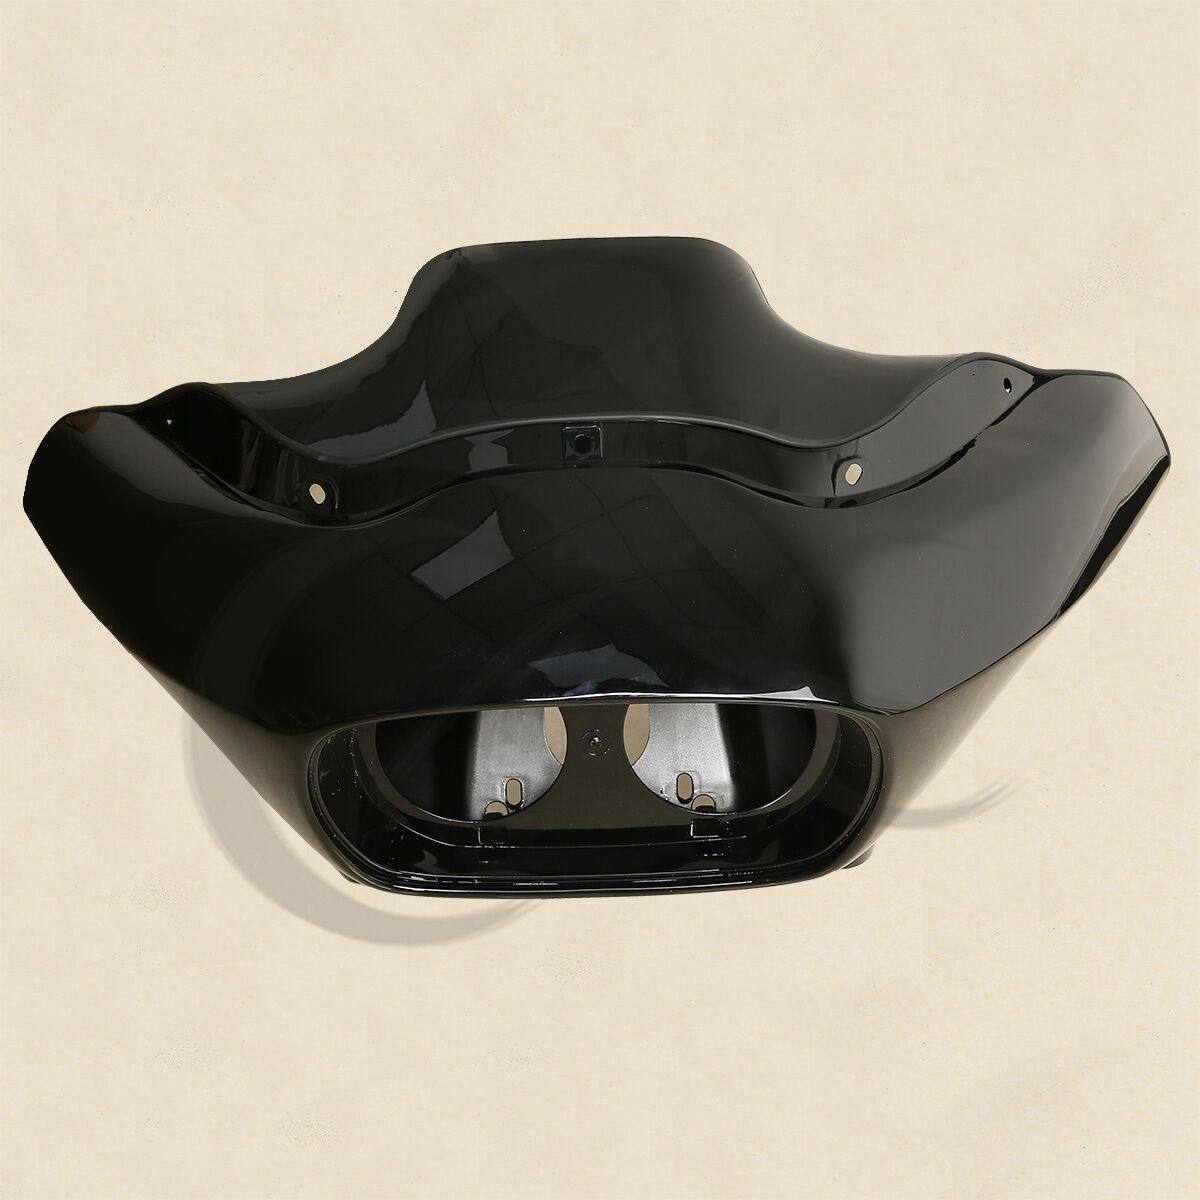 Vivid Black Injection ABS Inner & Outer Fairing For Harley Road Glide 1998-2013 - Moto Life Products